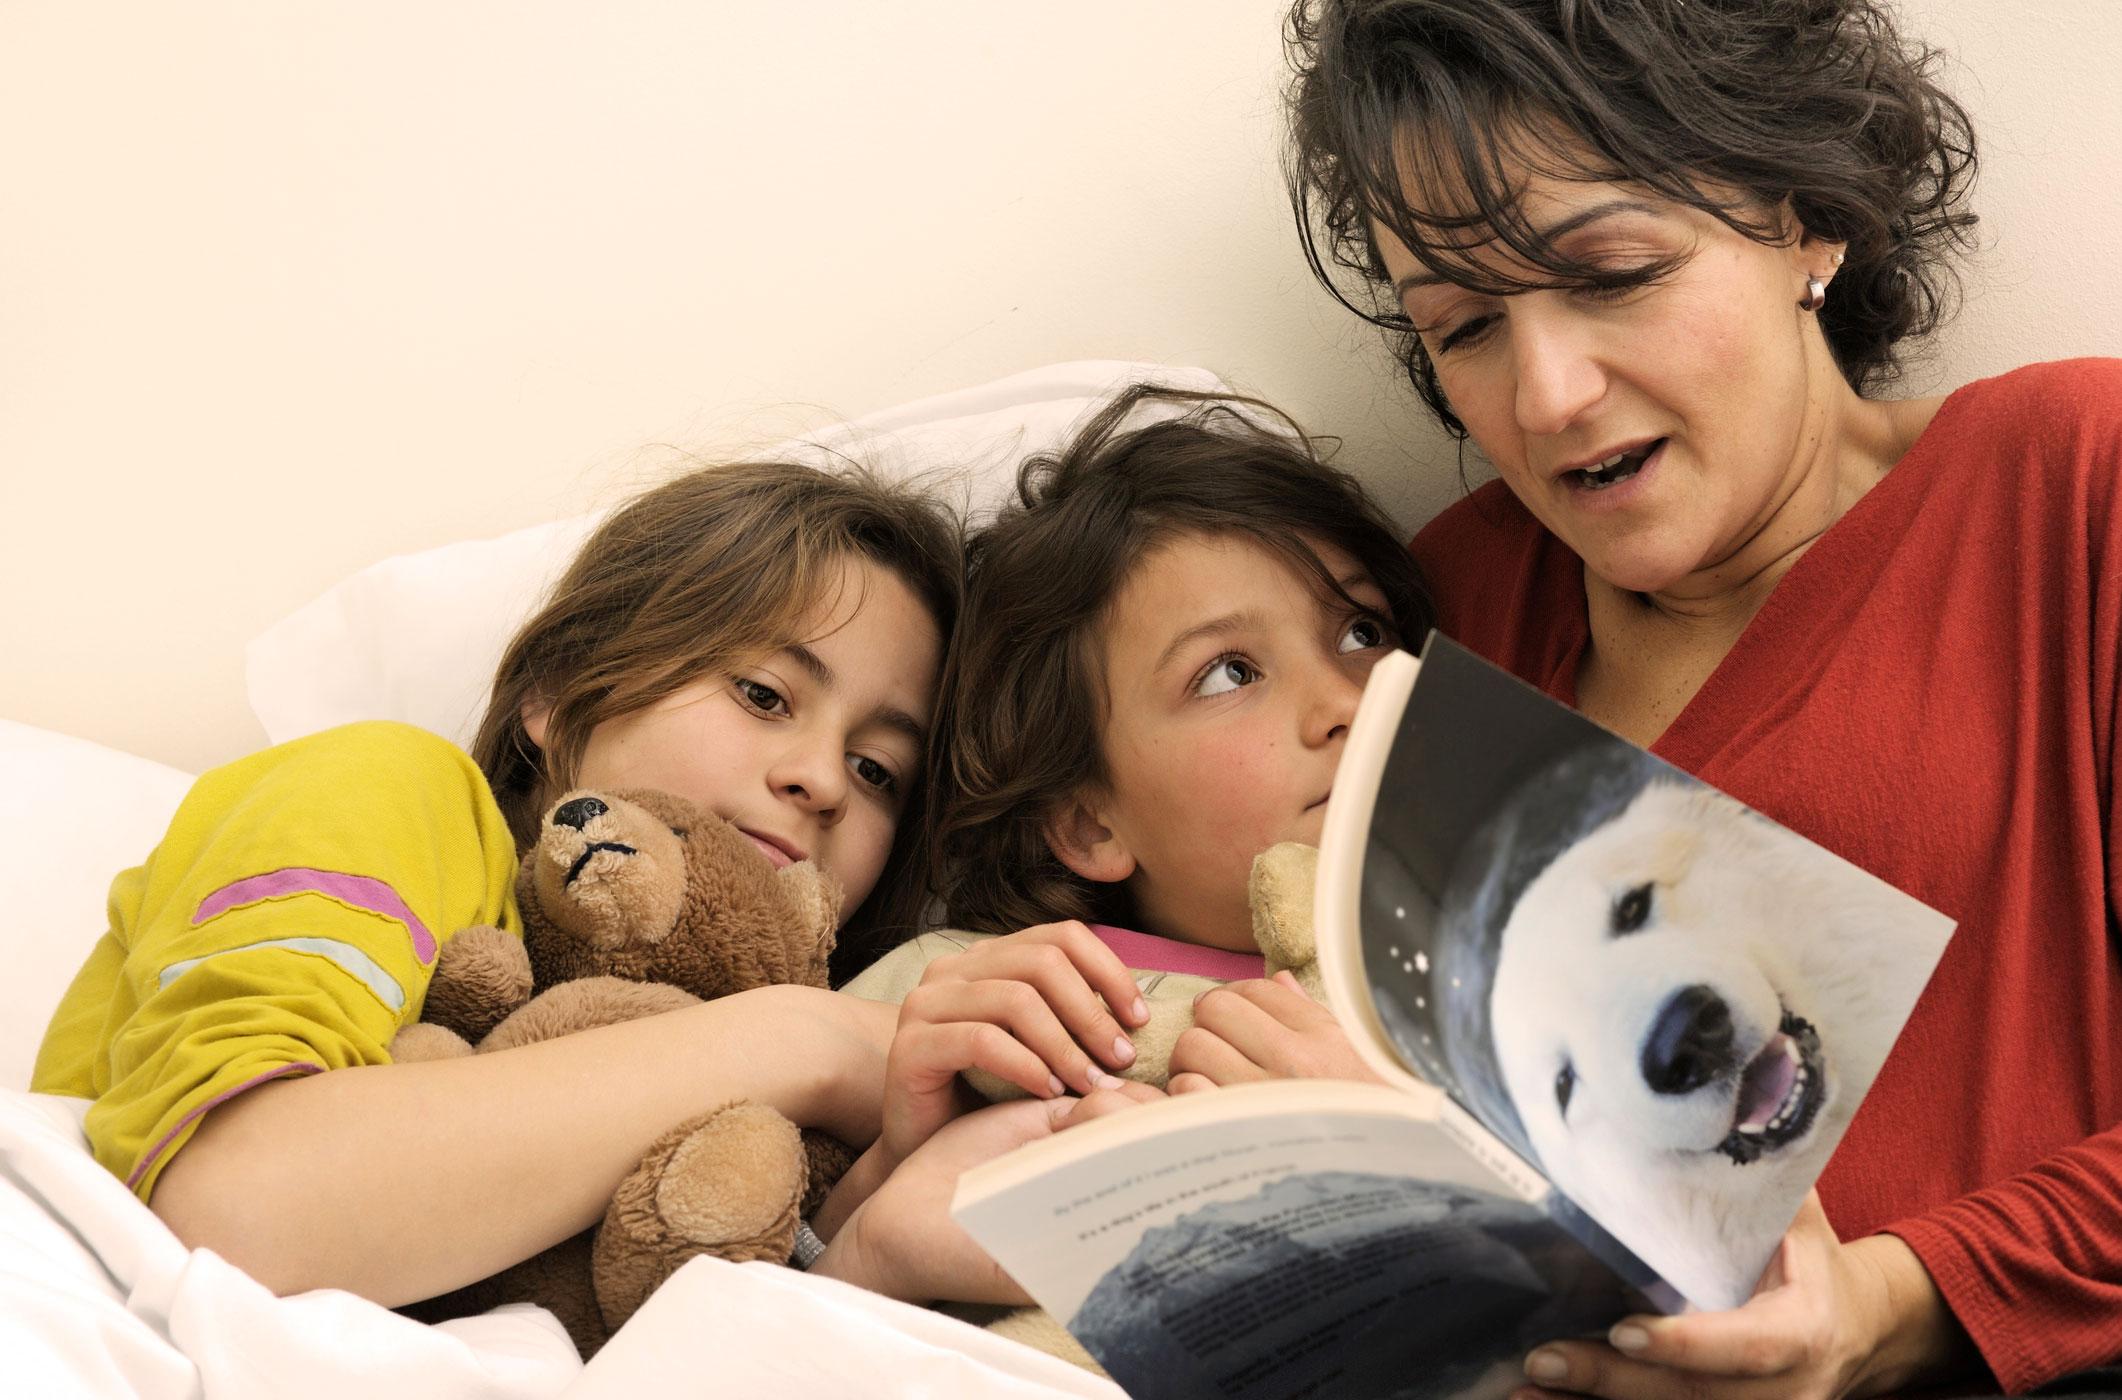 Mother reading books about polar bears to two kids